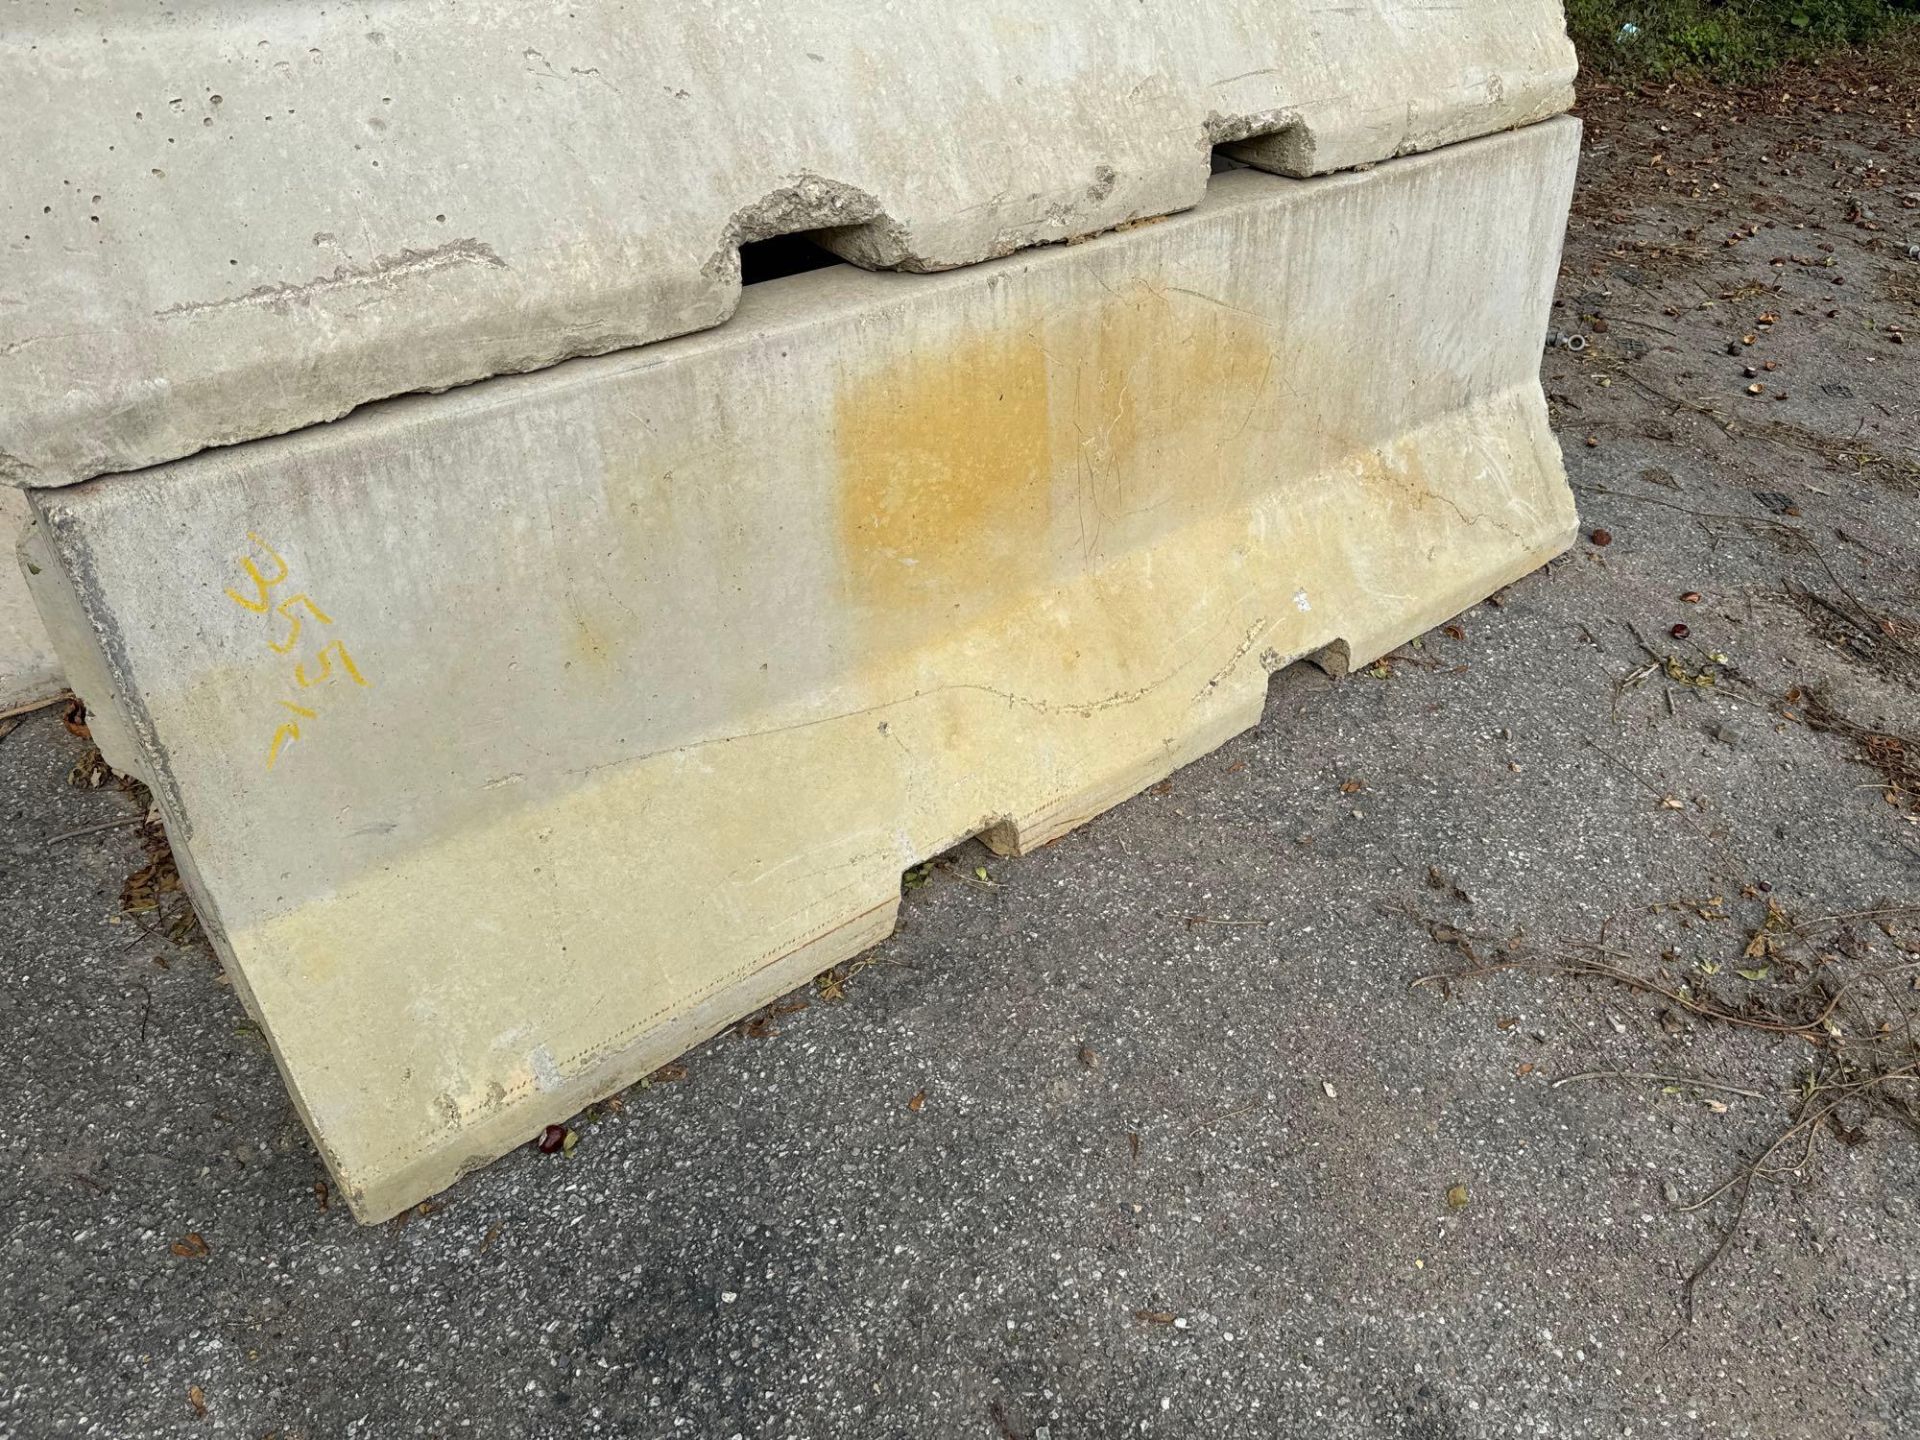 Two Concrete road barriers approx 2 tonnes